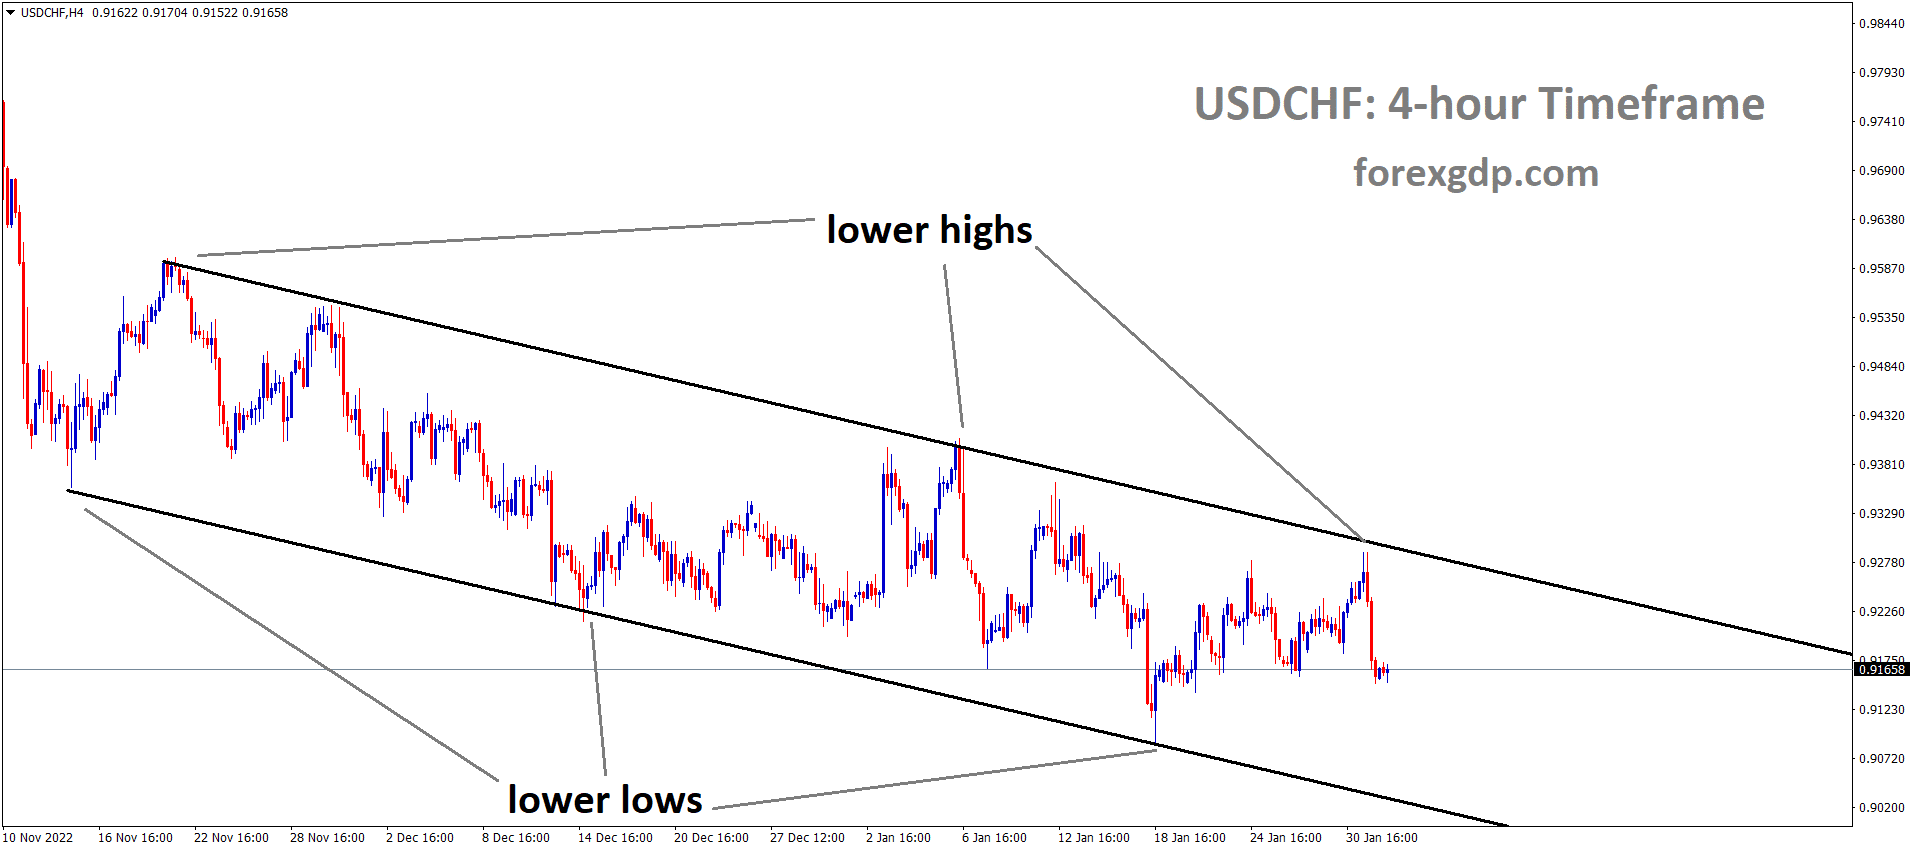 USDCHF is moving in the Descending channel and the market has fallen from the lower high area of the pattern